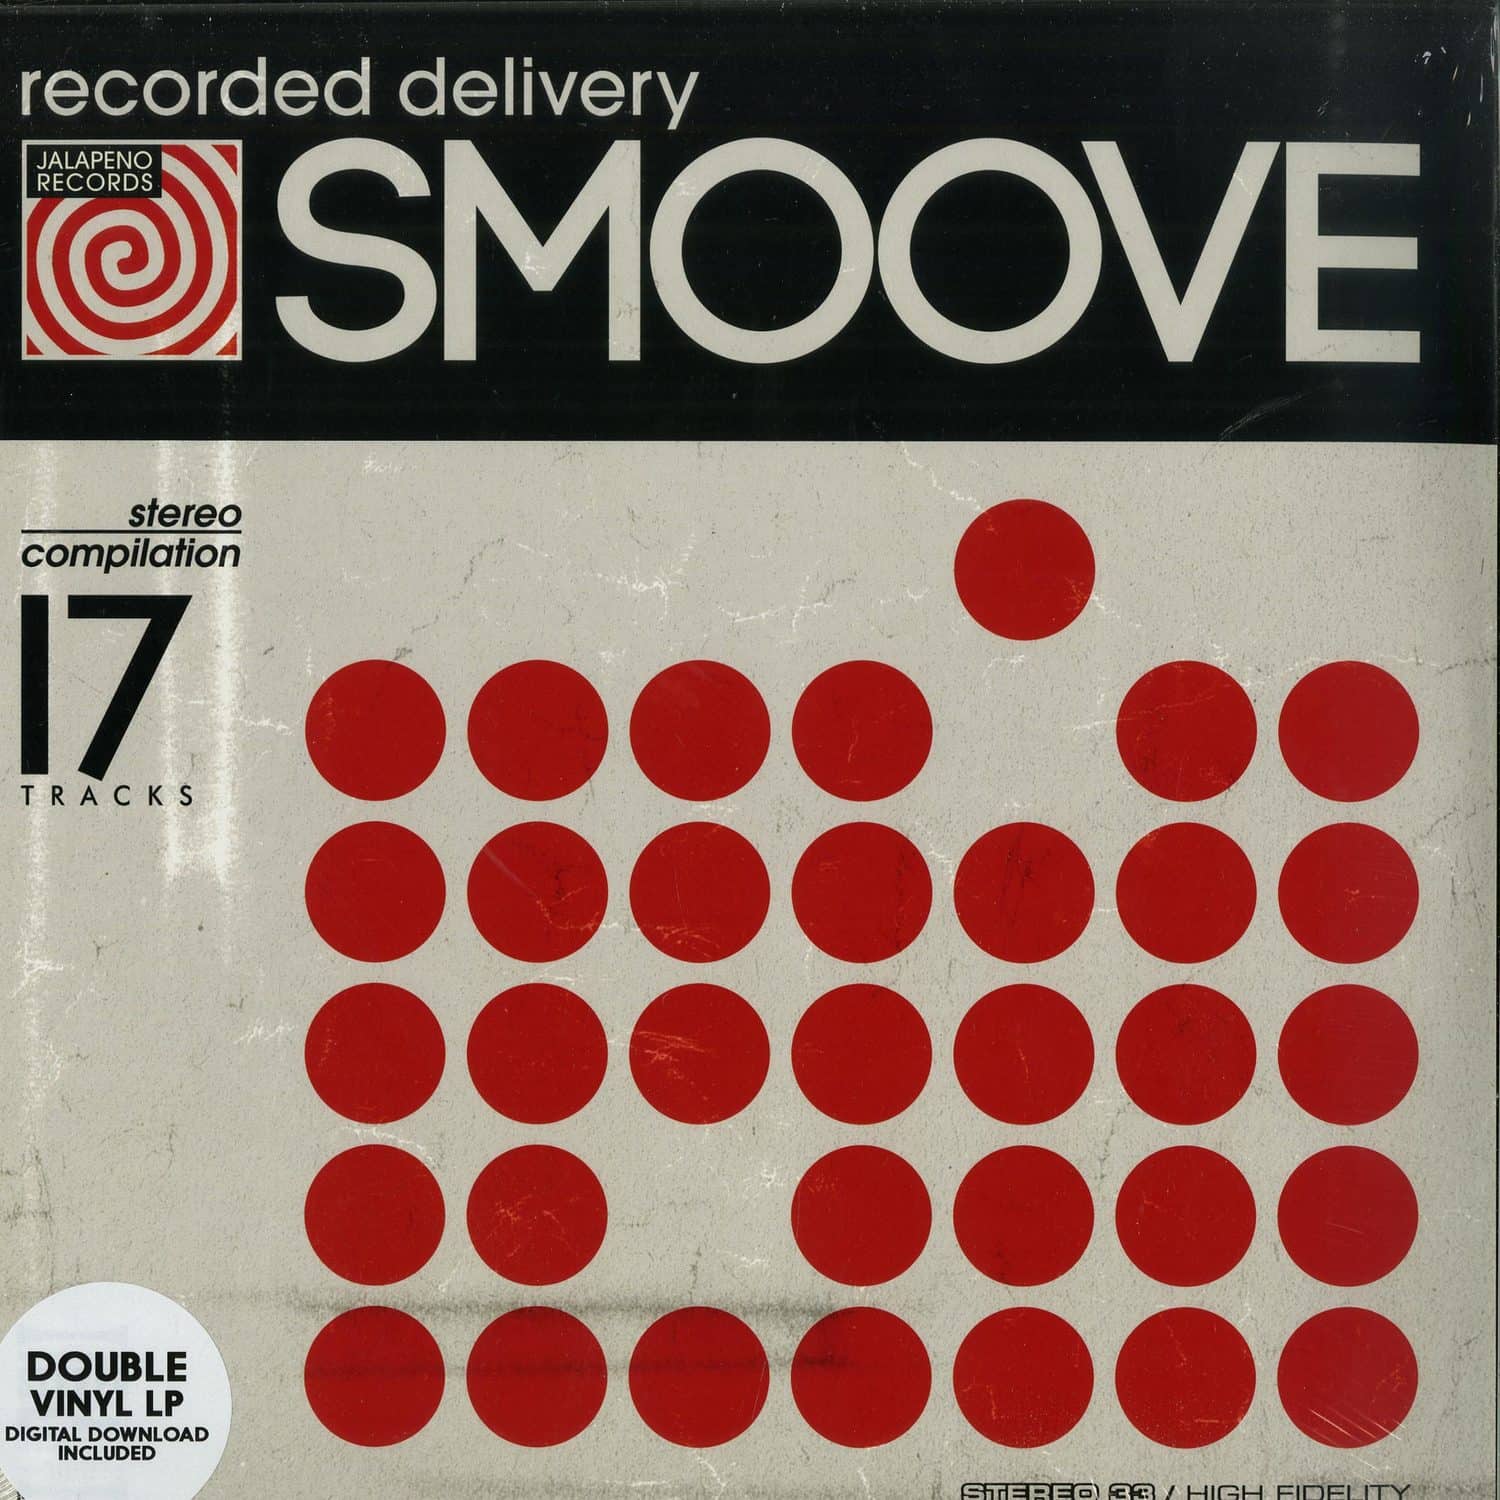 Smoove - RECORDED DELIVERY 